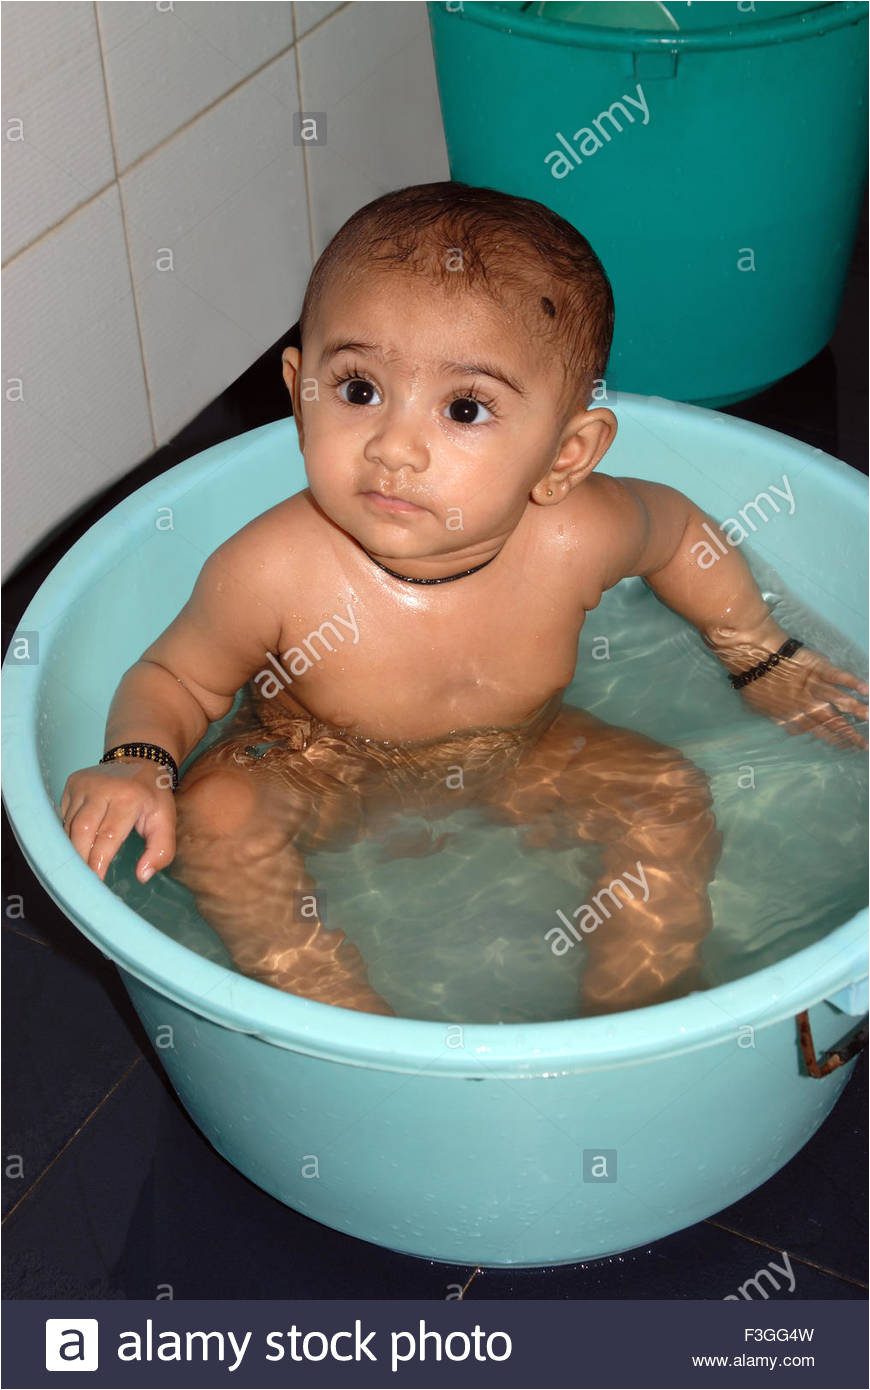 stock photo south asian indian baby taking bath in tub bathroom looking at side